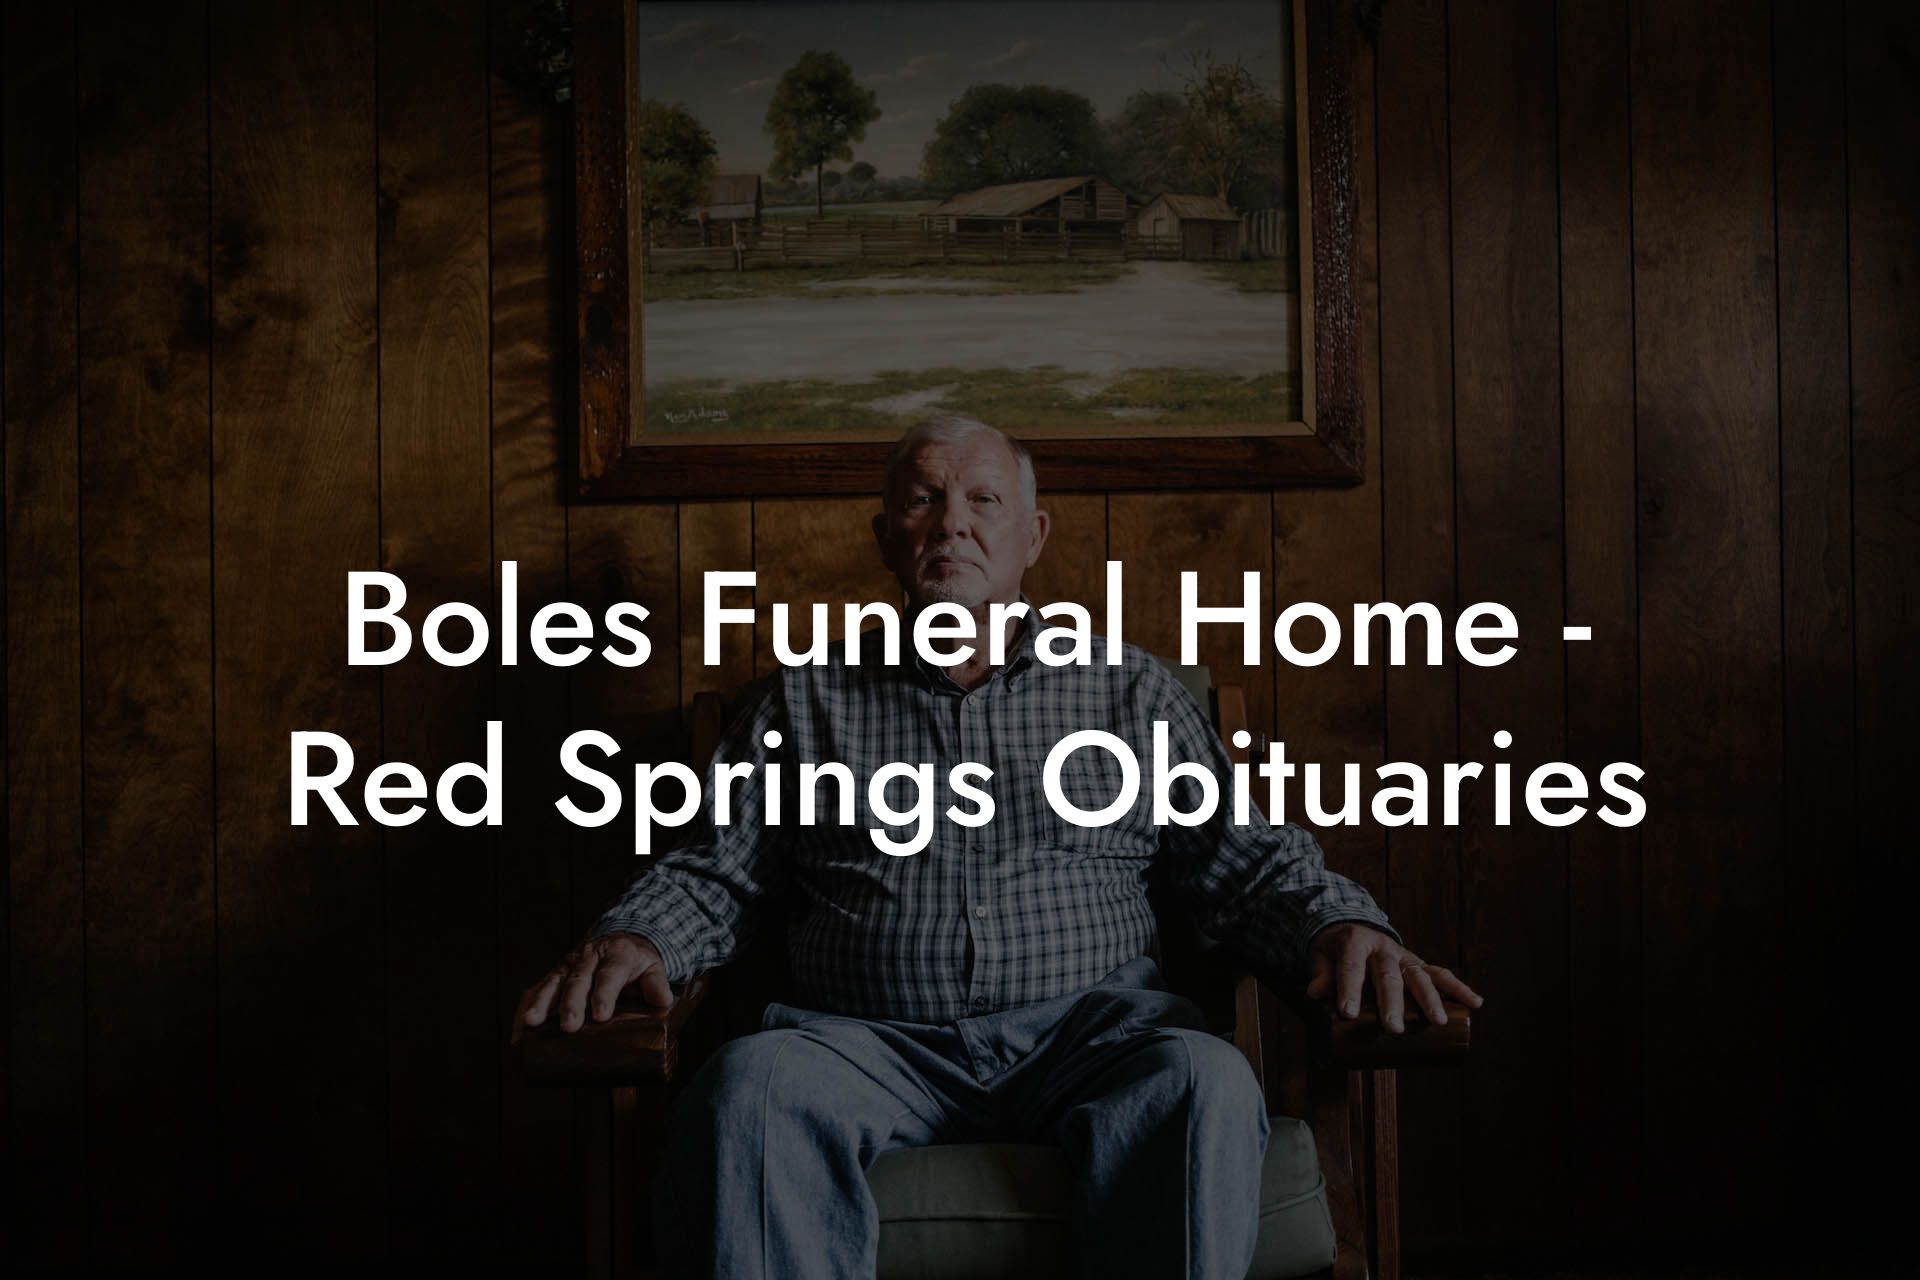 Boles Funeral Home - Red Springs Obituaries